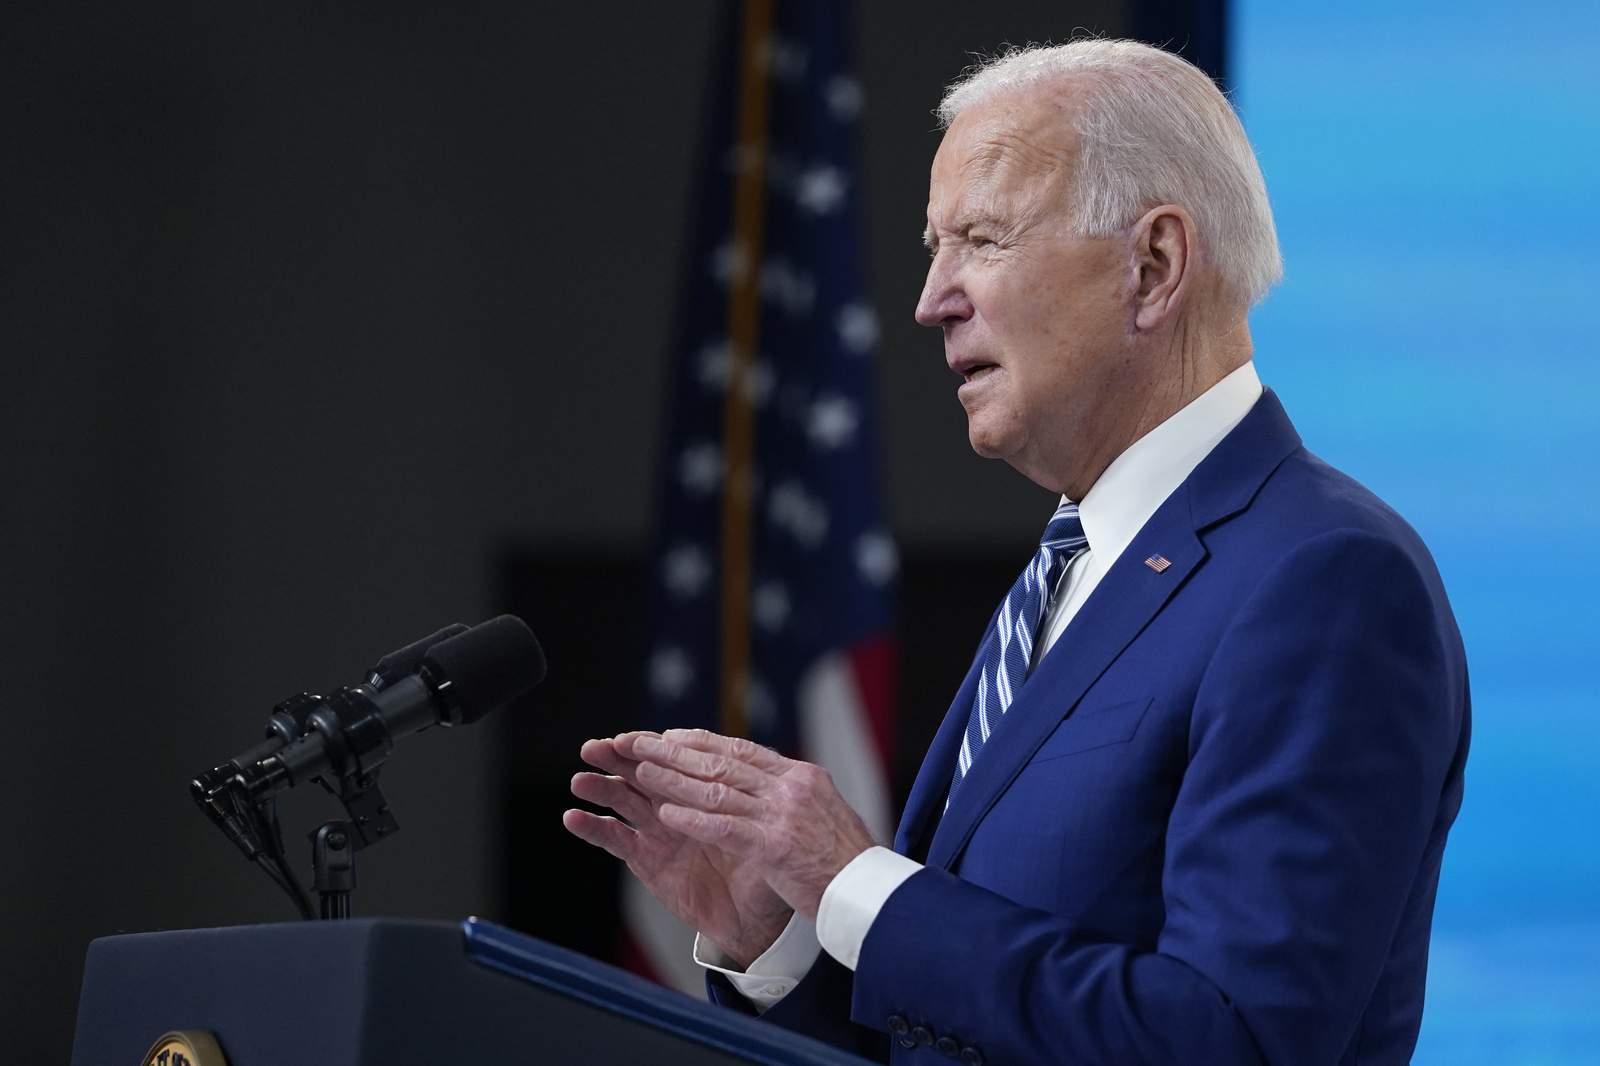 Biden wants infrastructure package approved over summer